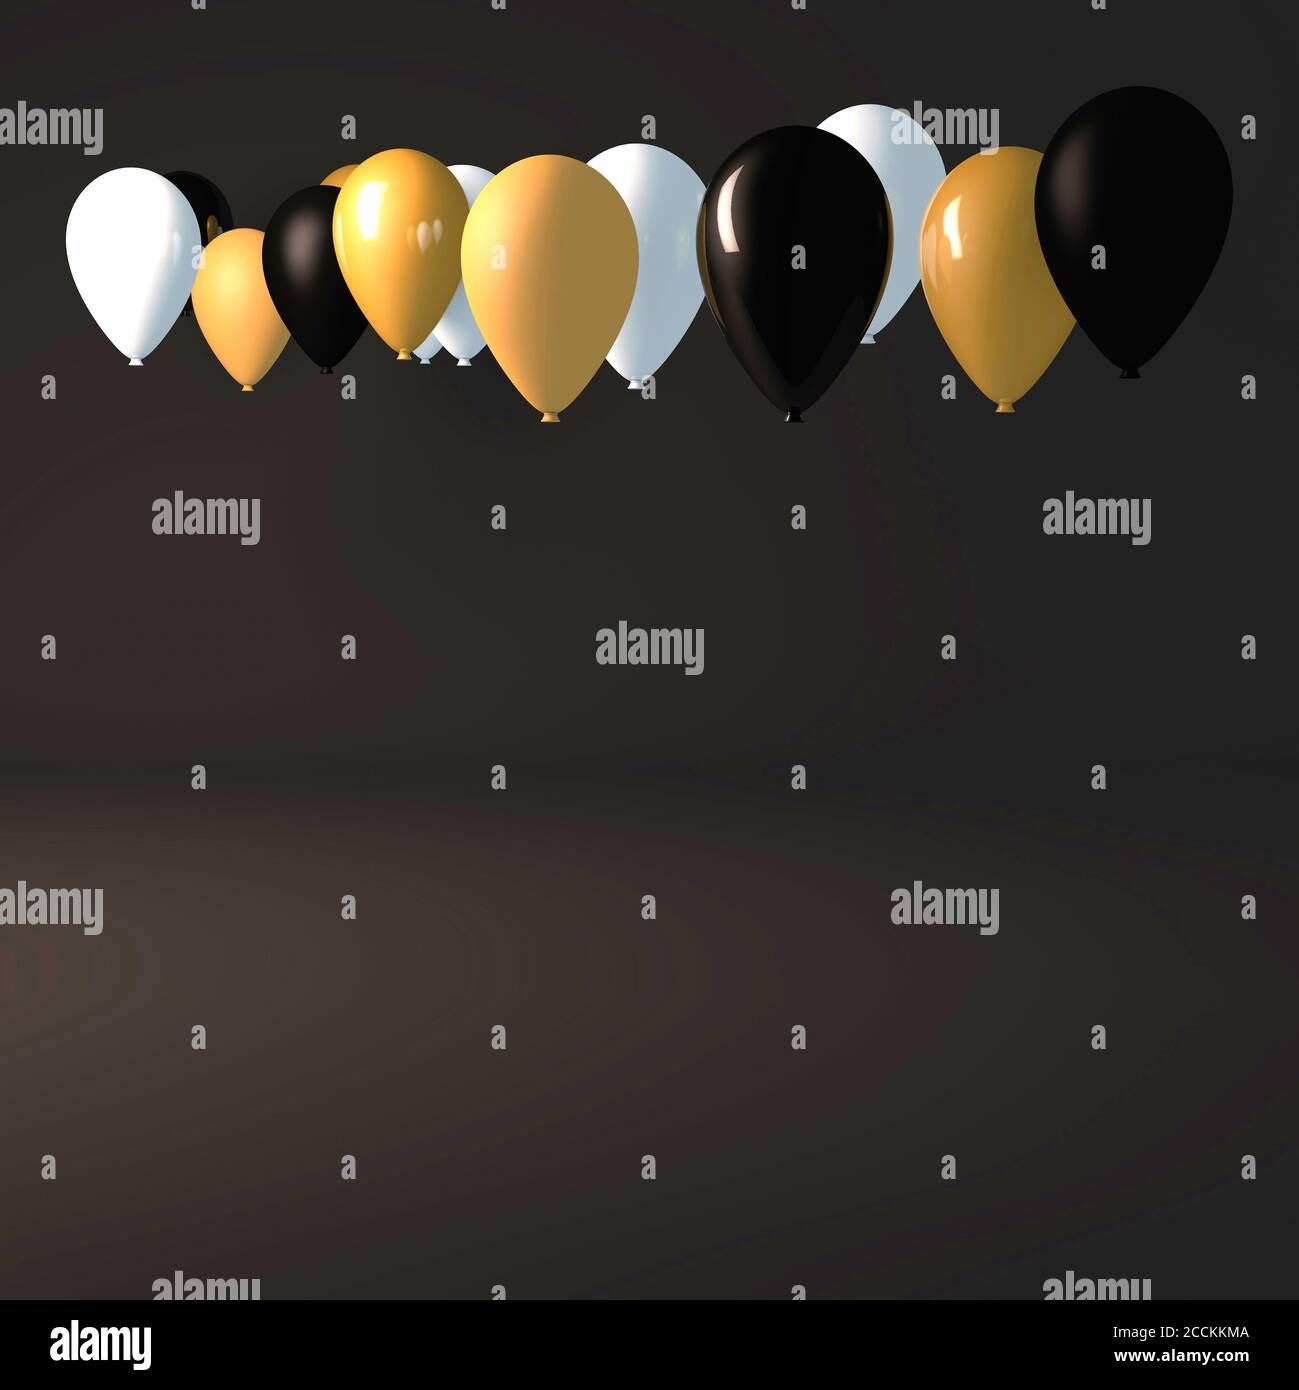 3d illustration render concept of gold balloons on a black background Stock Photo